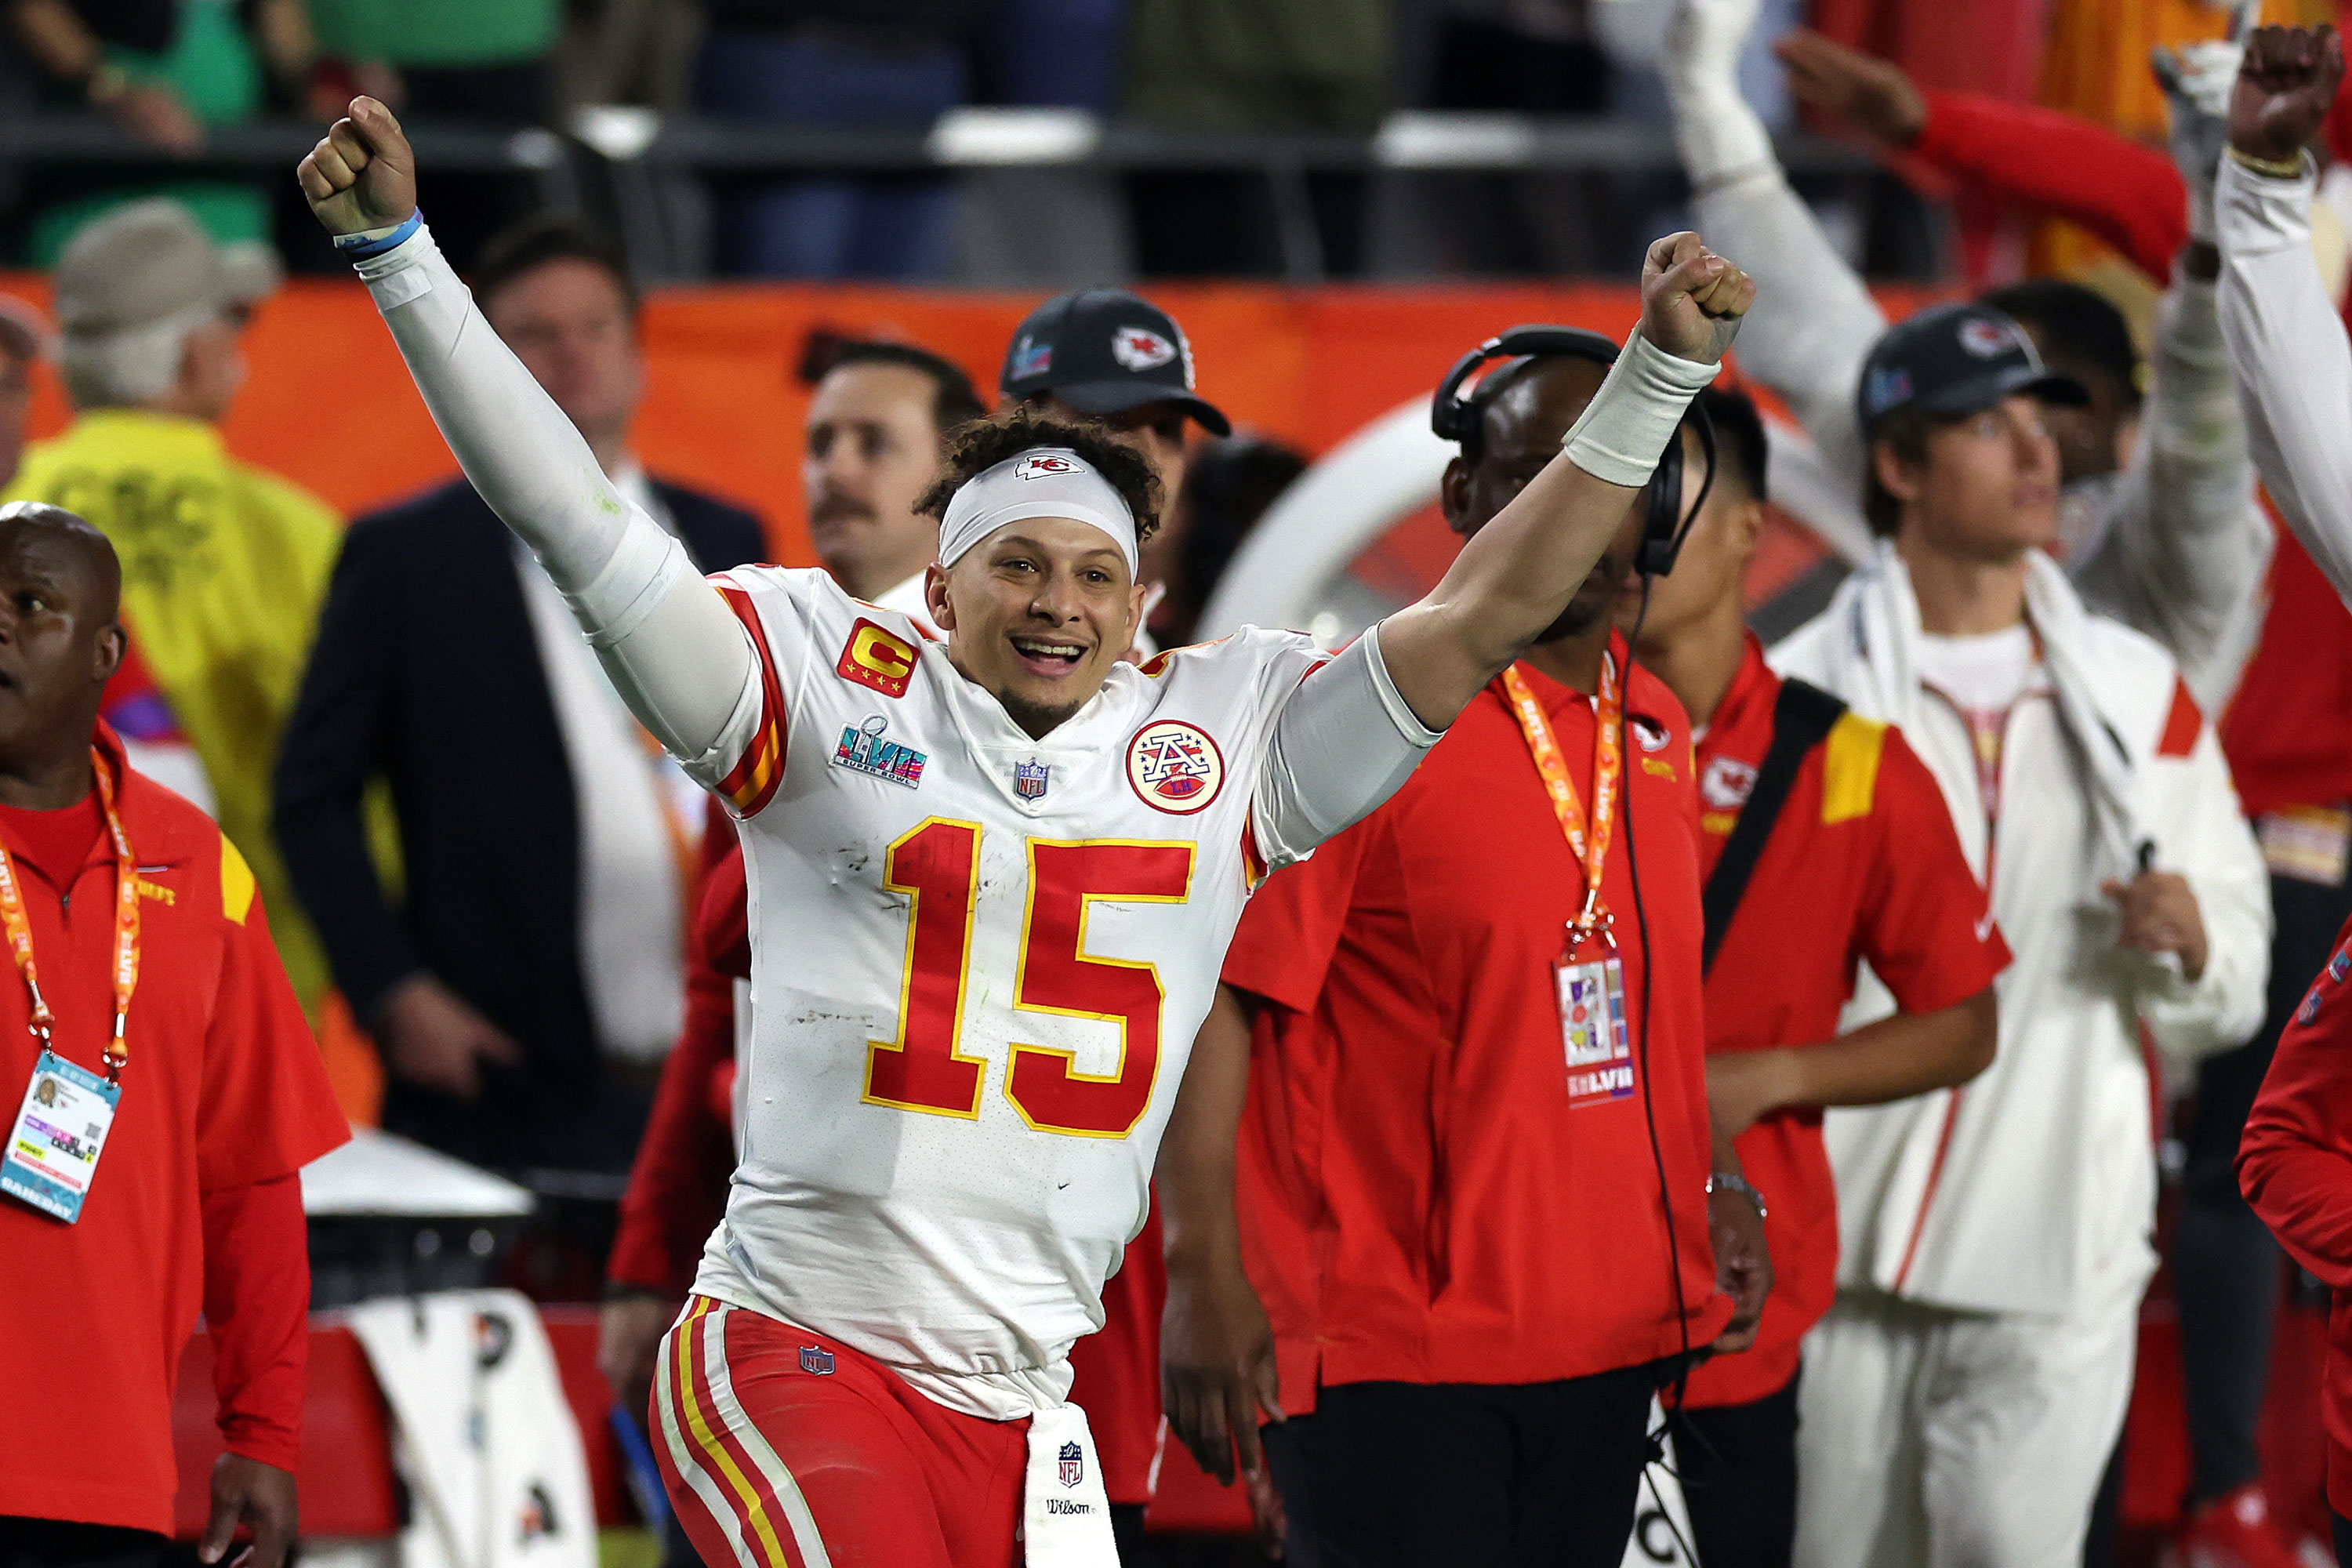 Patrick Mahomes celebrates after defeating the Philadelphia Eagles to win Super Bowl LVII.